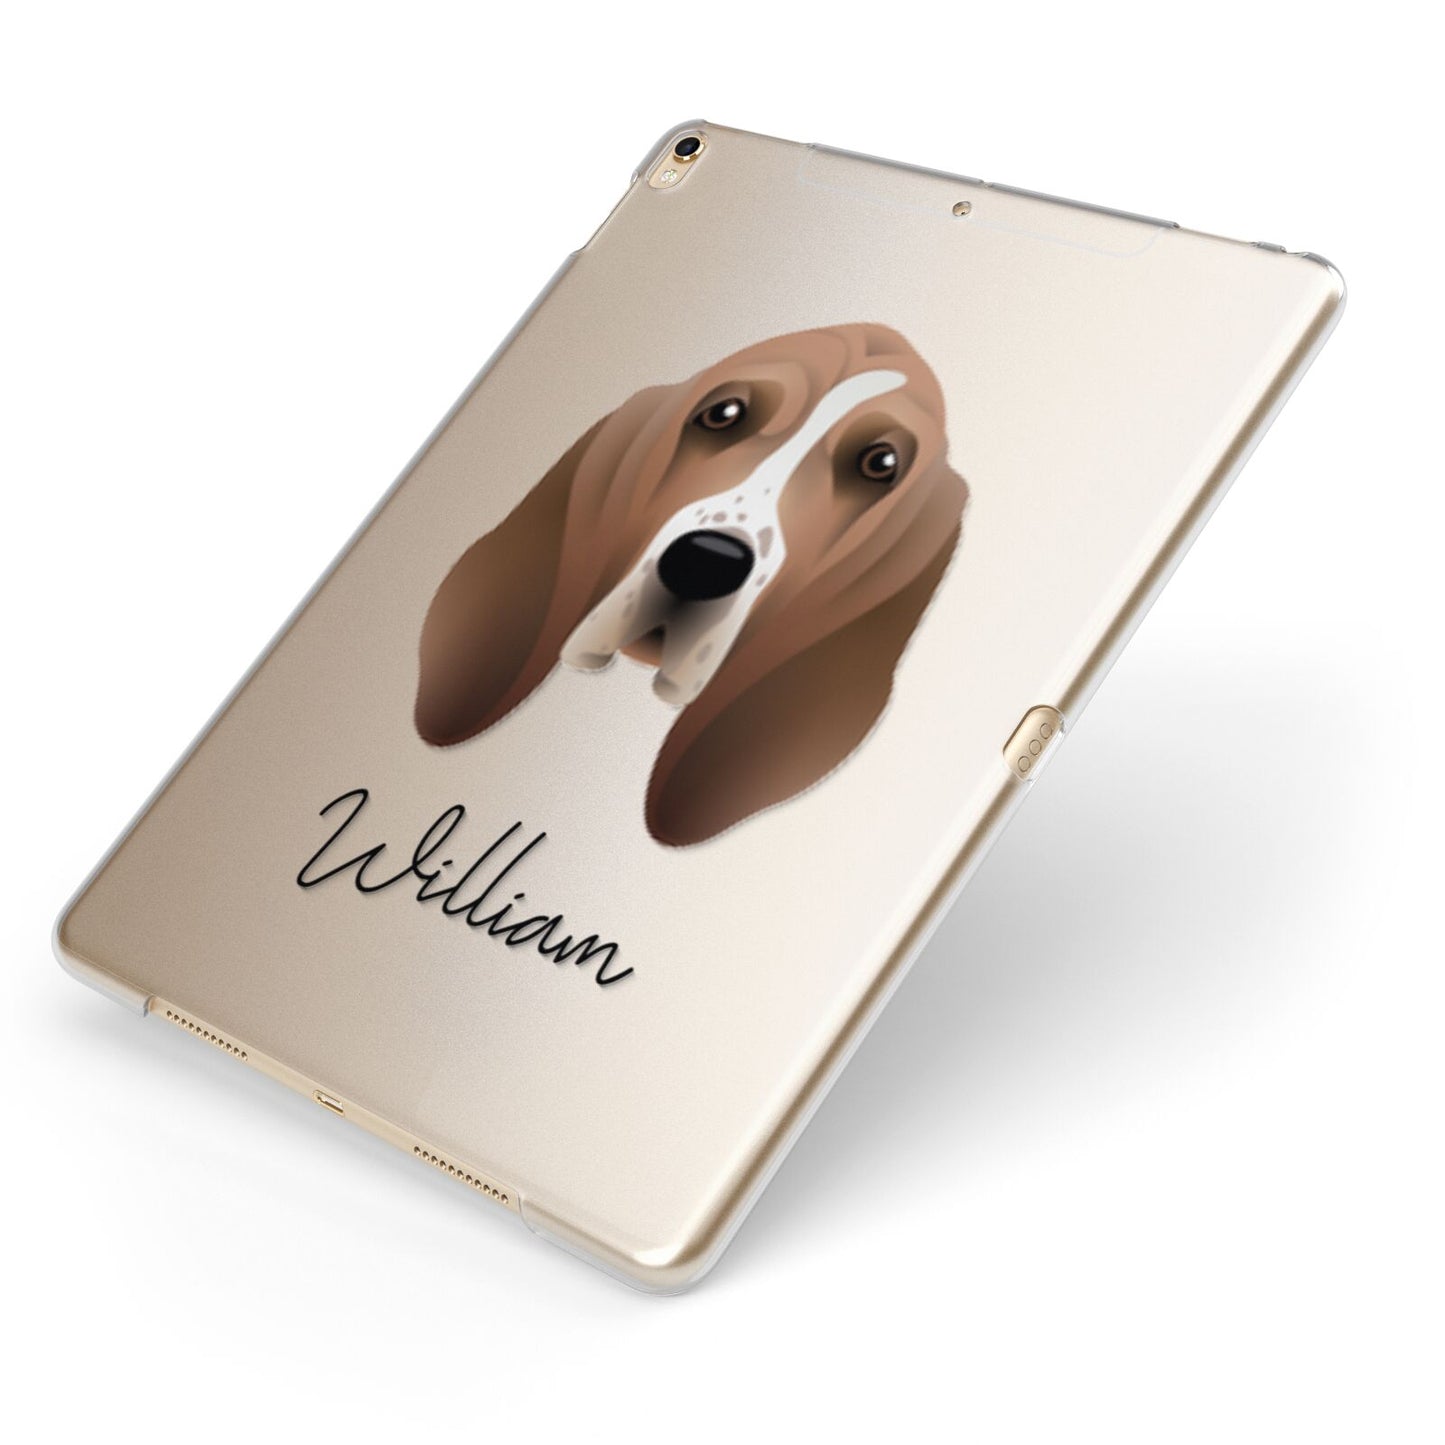 Basset Hound Personalised Apple iPad Case on Gold iPad Side View